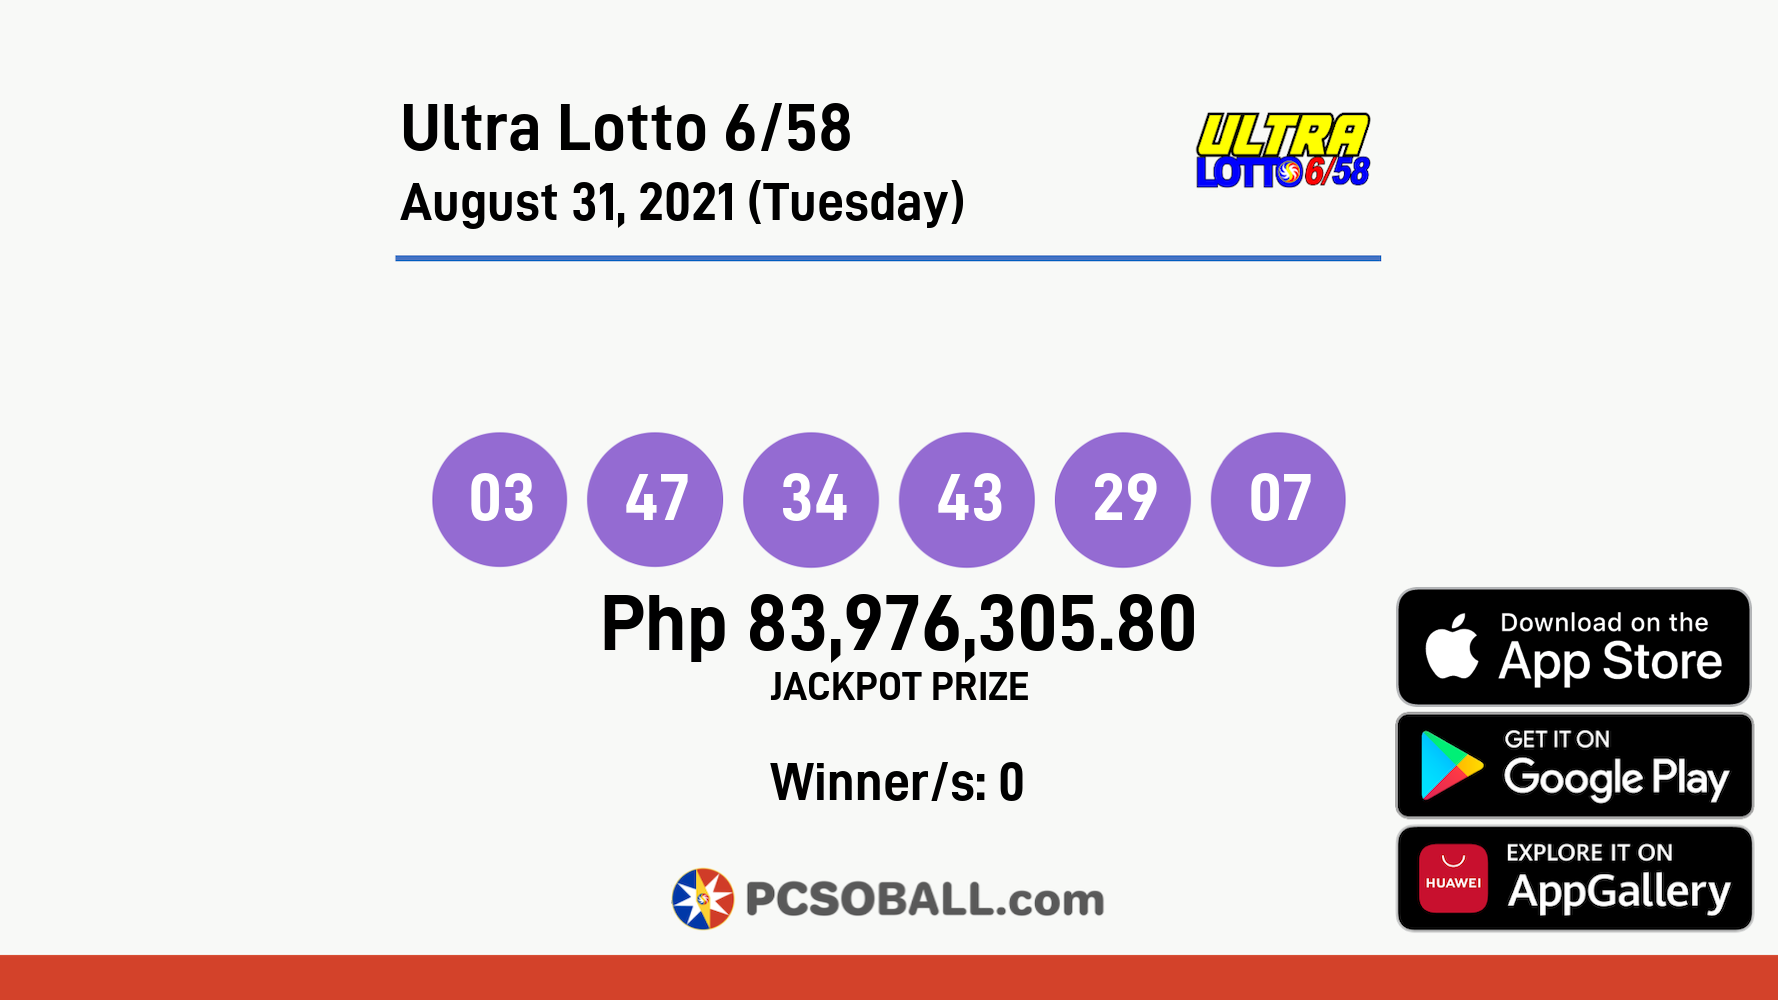 Ultra Lotto 6/58 August 31, 2021 (Tuesday) Result